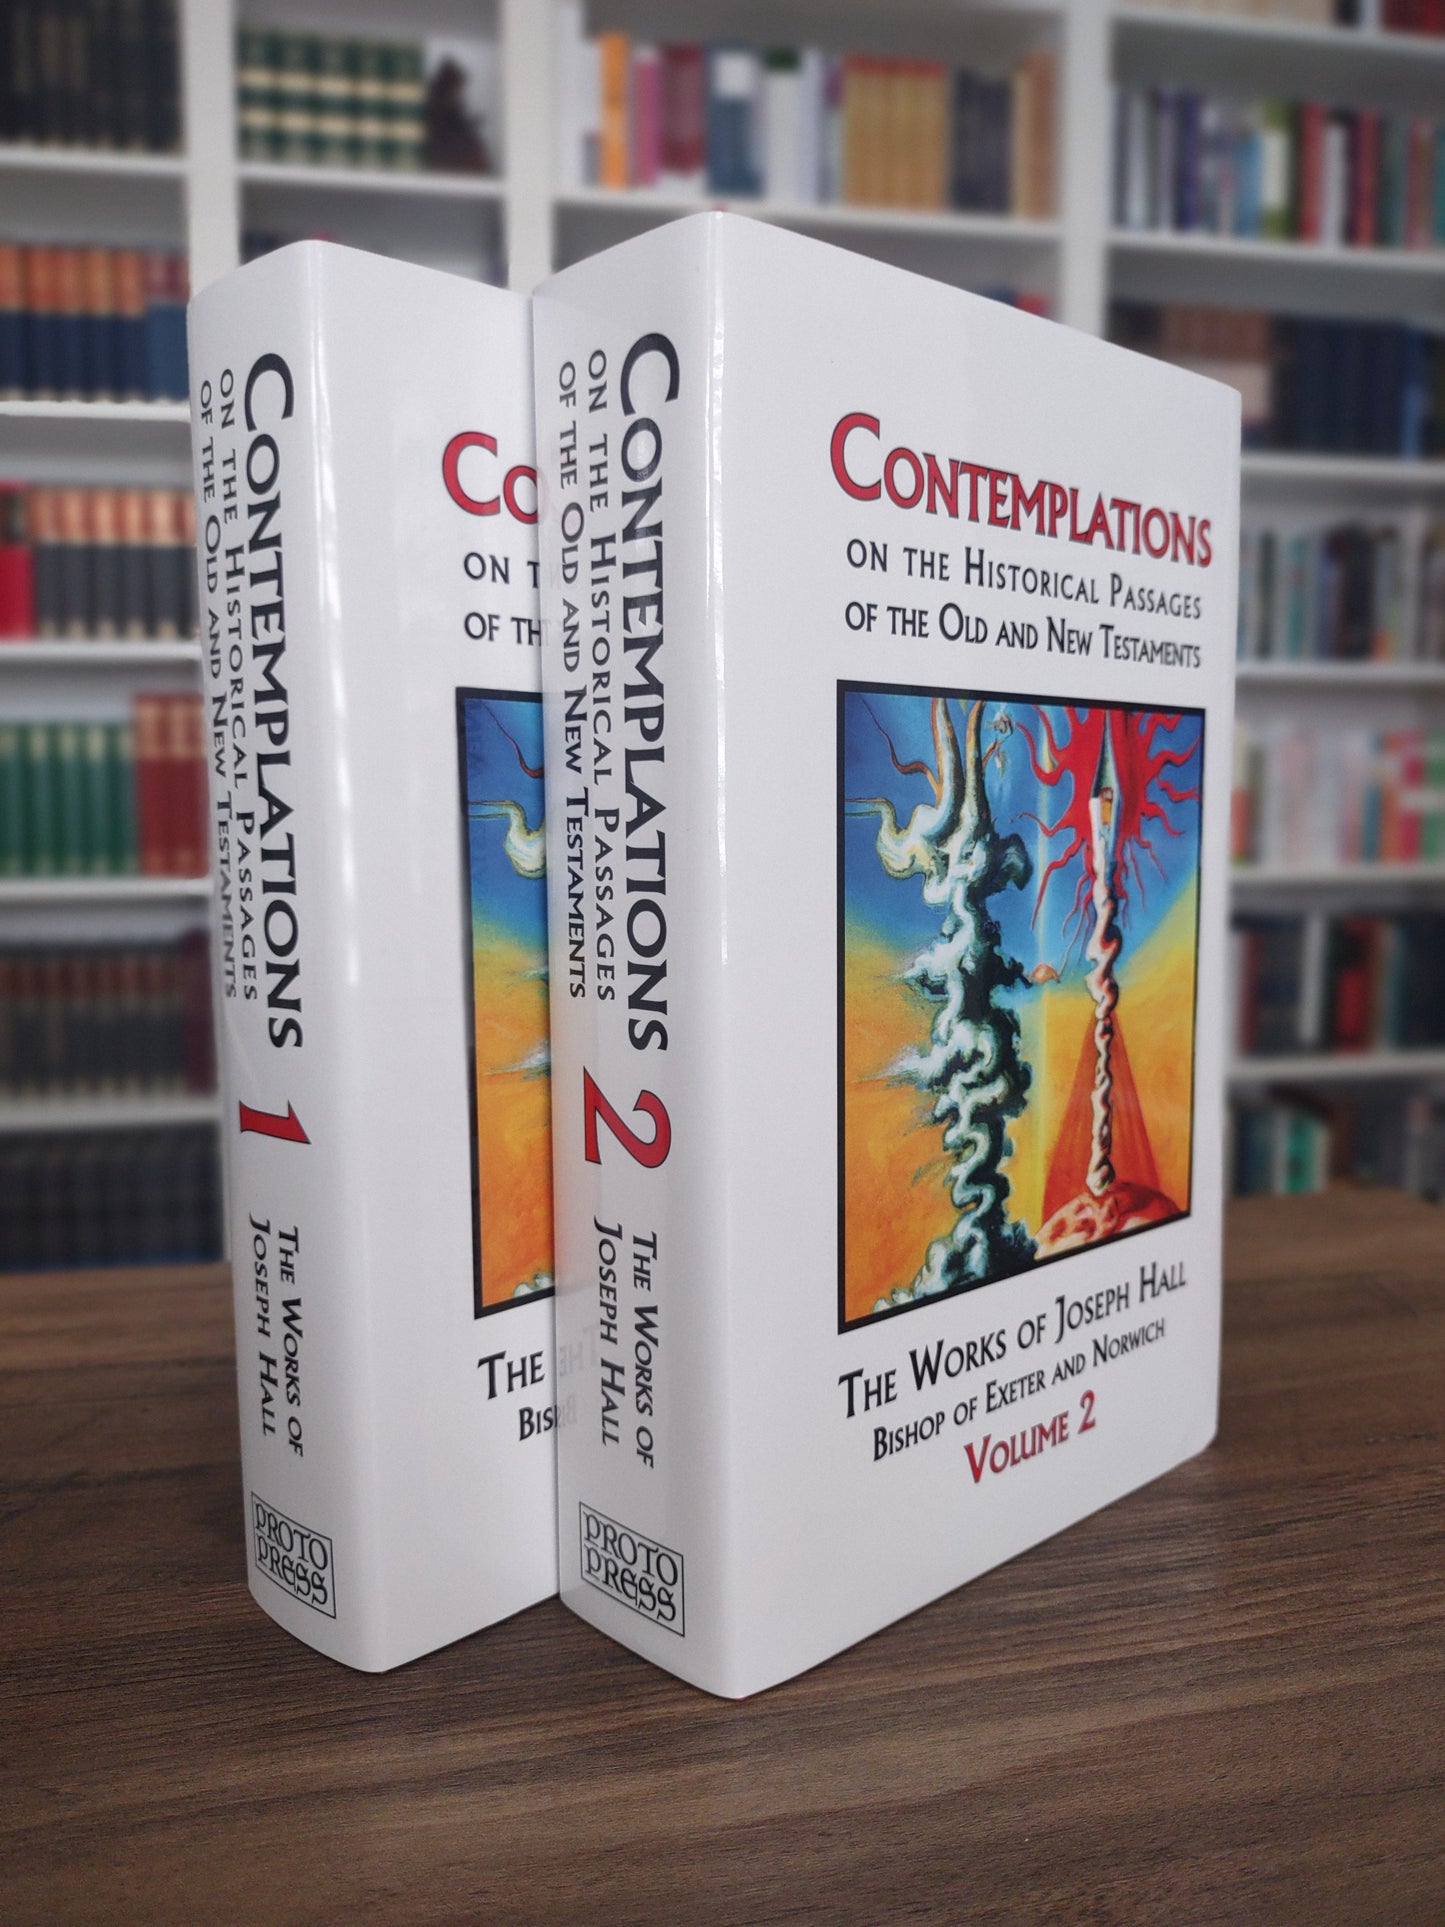 Hall's Contemplations on the Old and New Testament (2 vols)